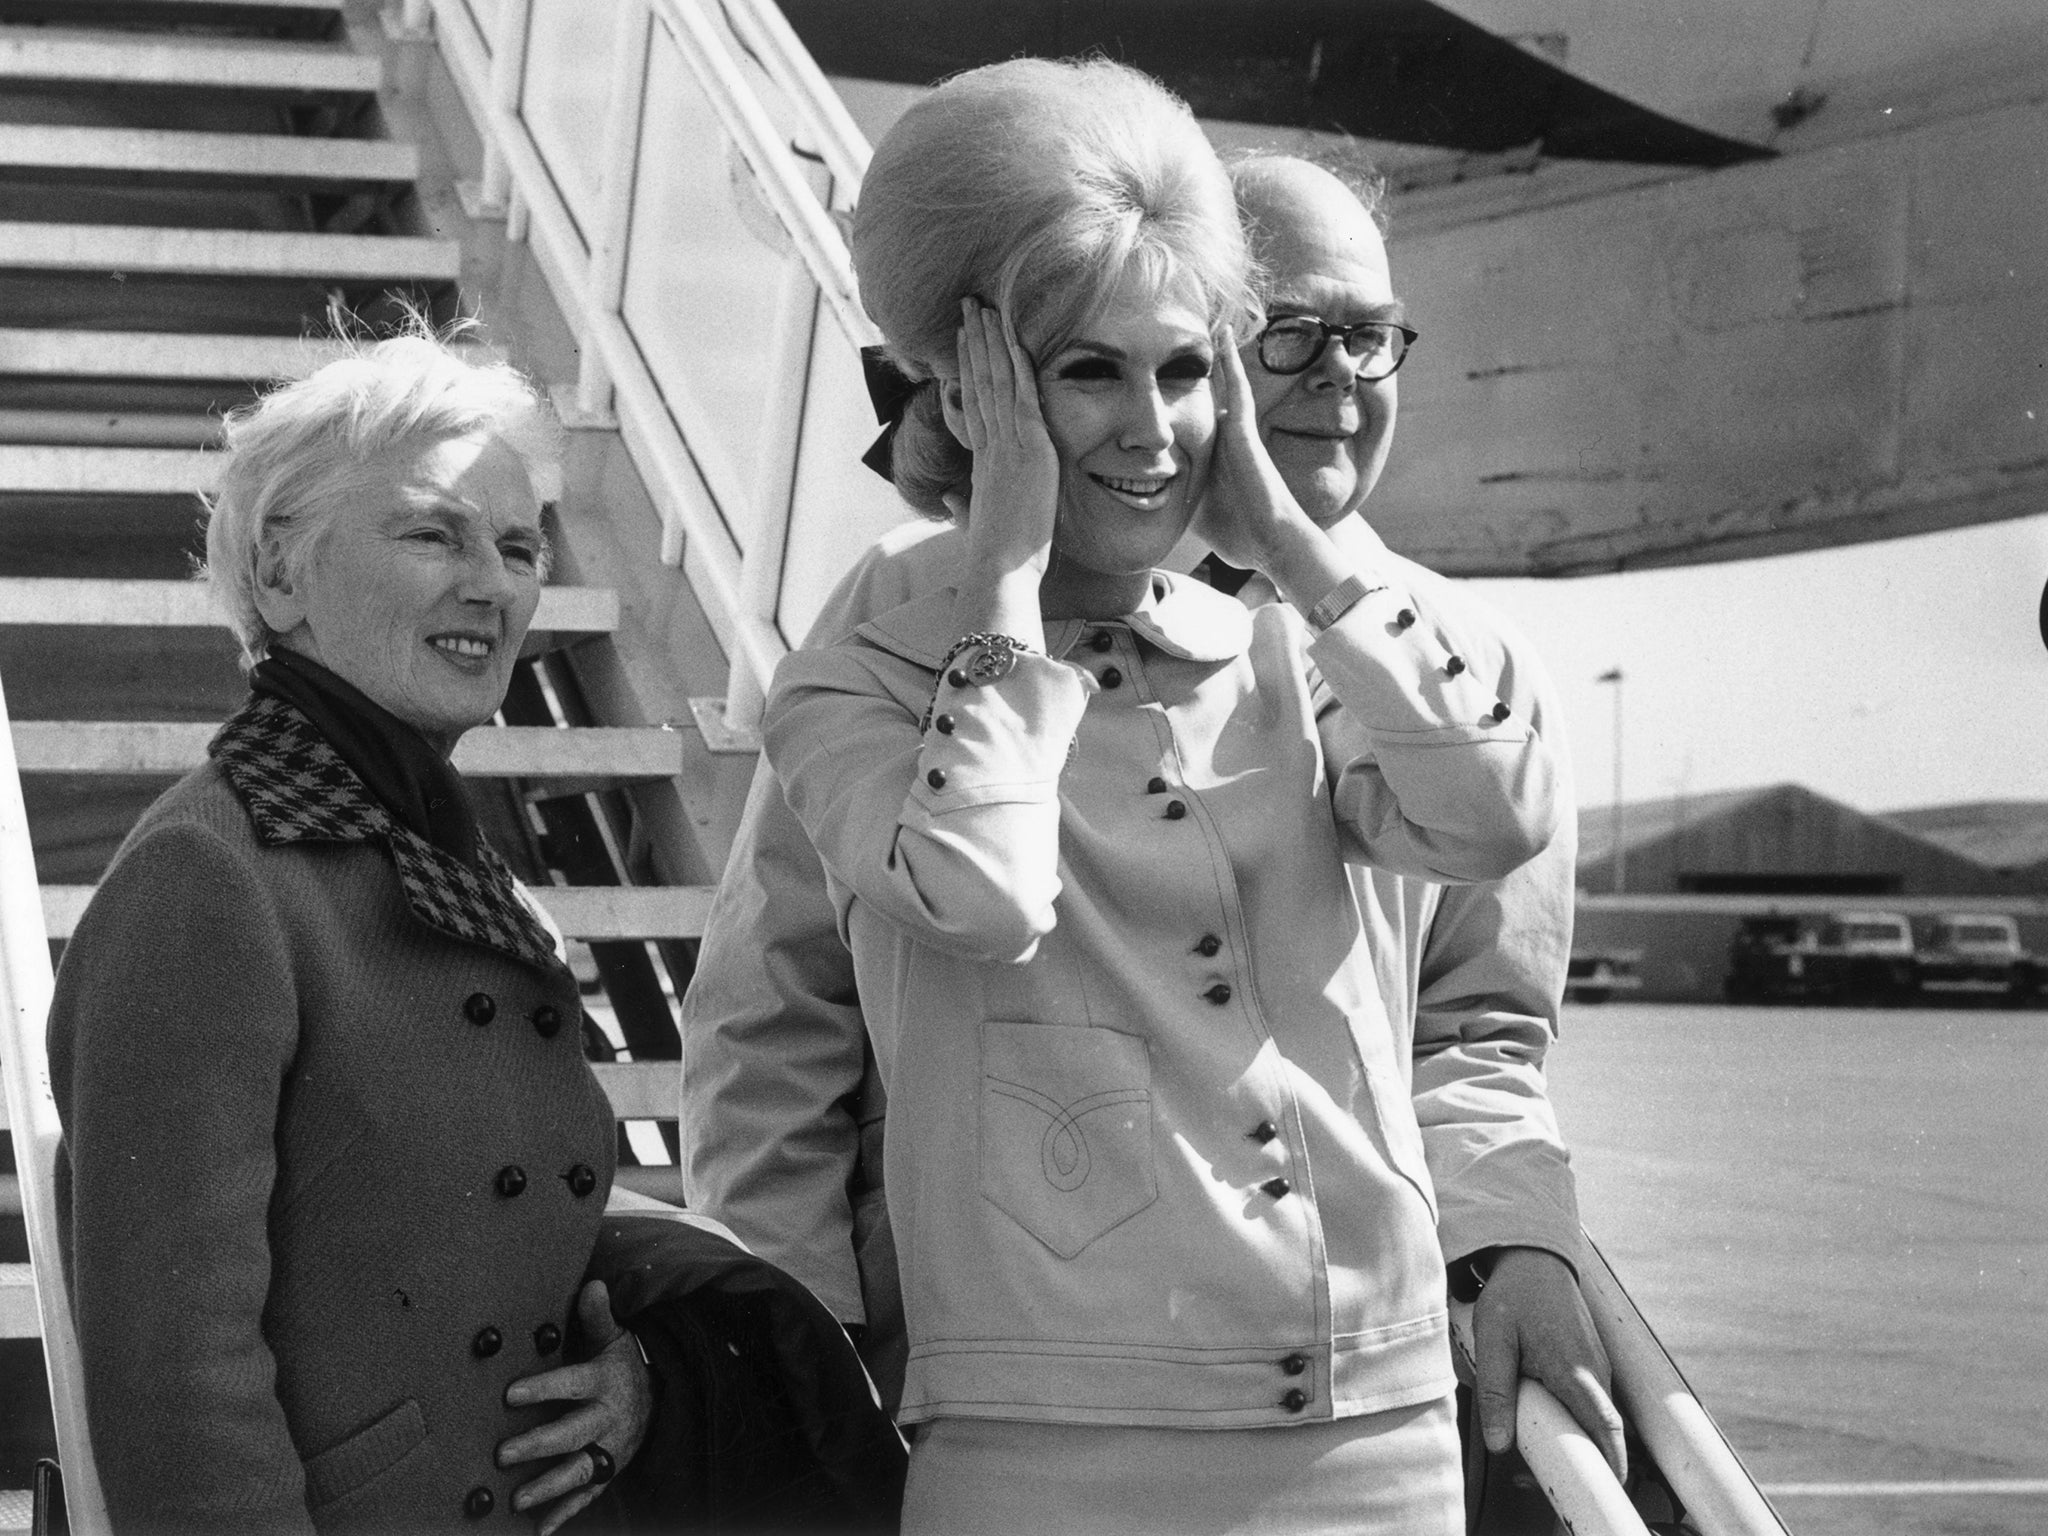 At London airport in 1964, boarding a plane for New York with parents Kay and Gerard